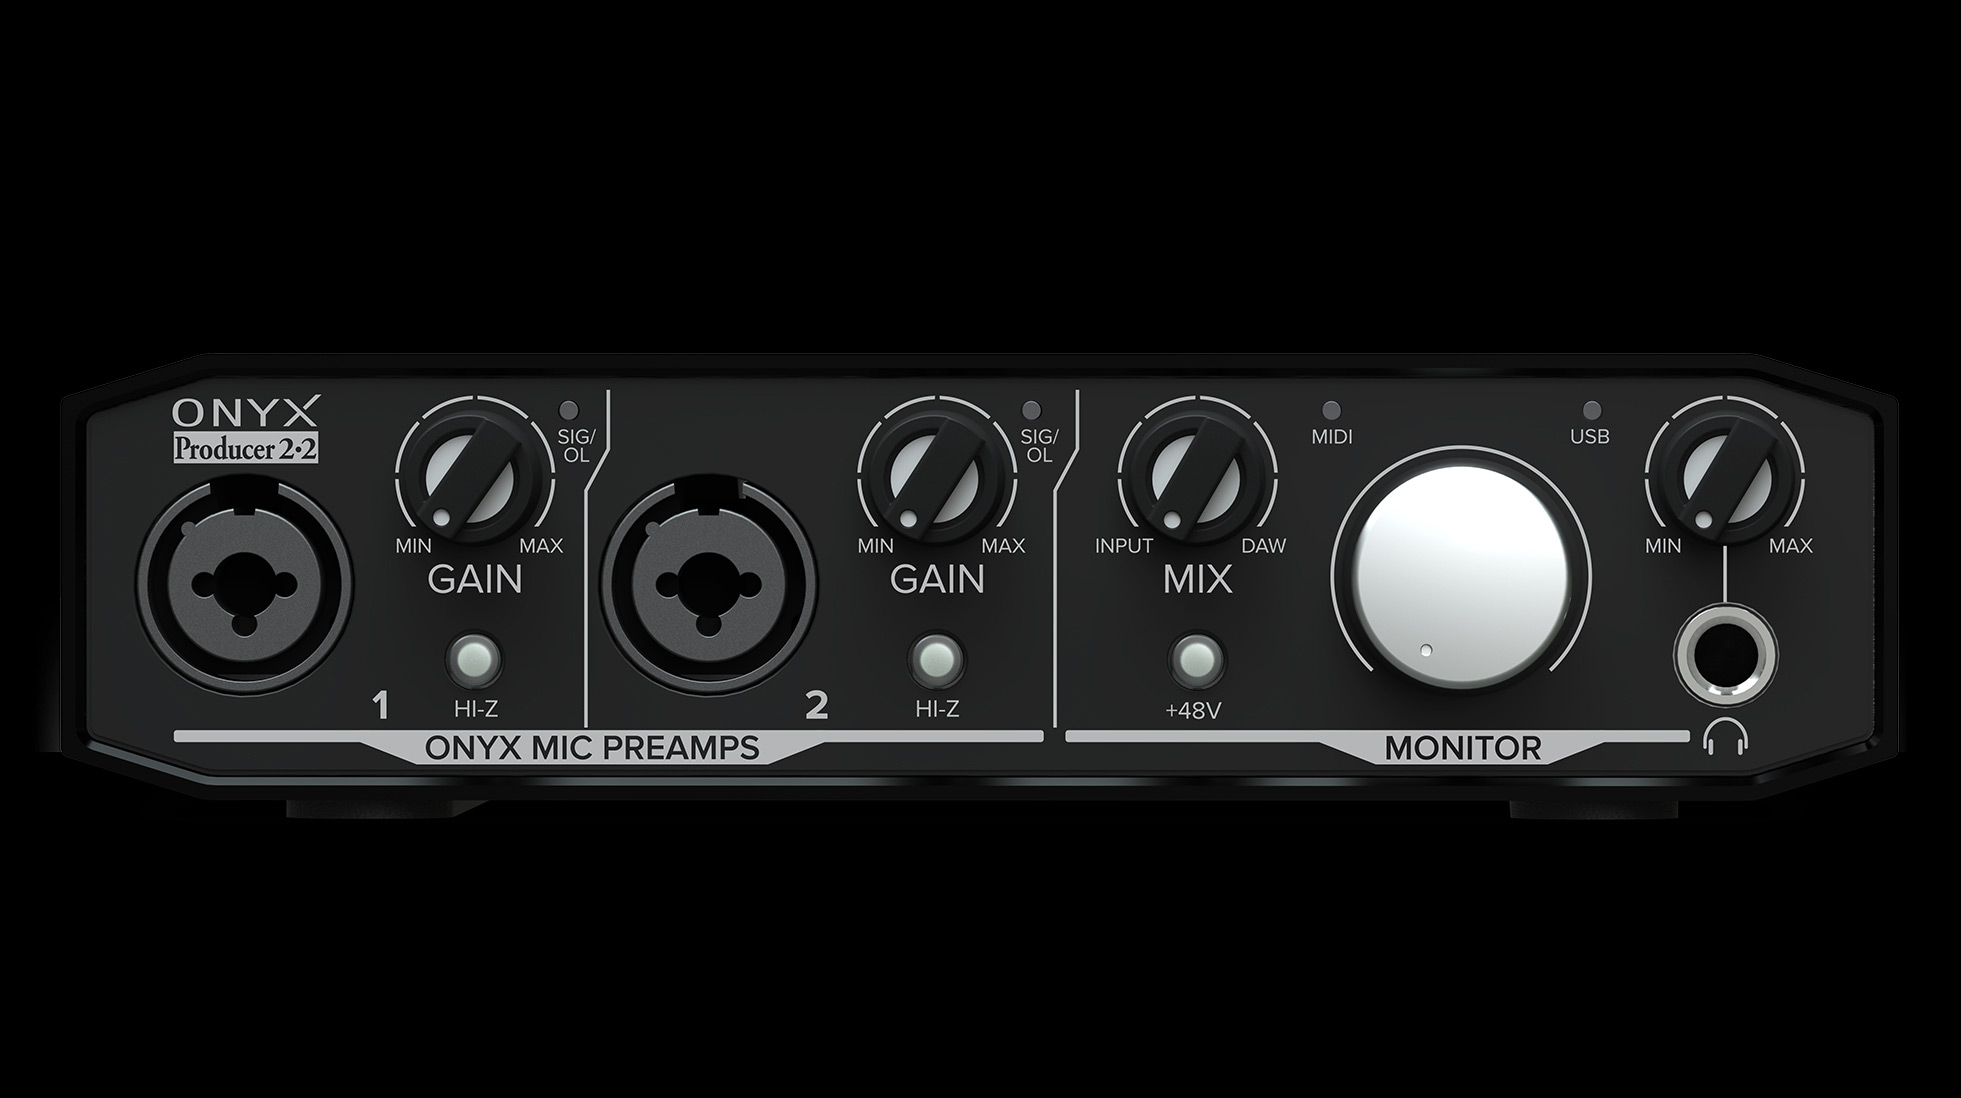 The Onyx Producer 2•2™, one of the best audio interface under 200 dollars, expands the versatility with dual Onyx mic pres and MIDI I/O for controllers, synthesizers and more. 